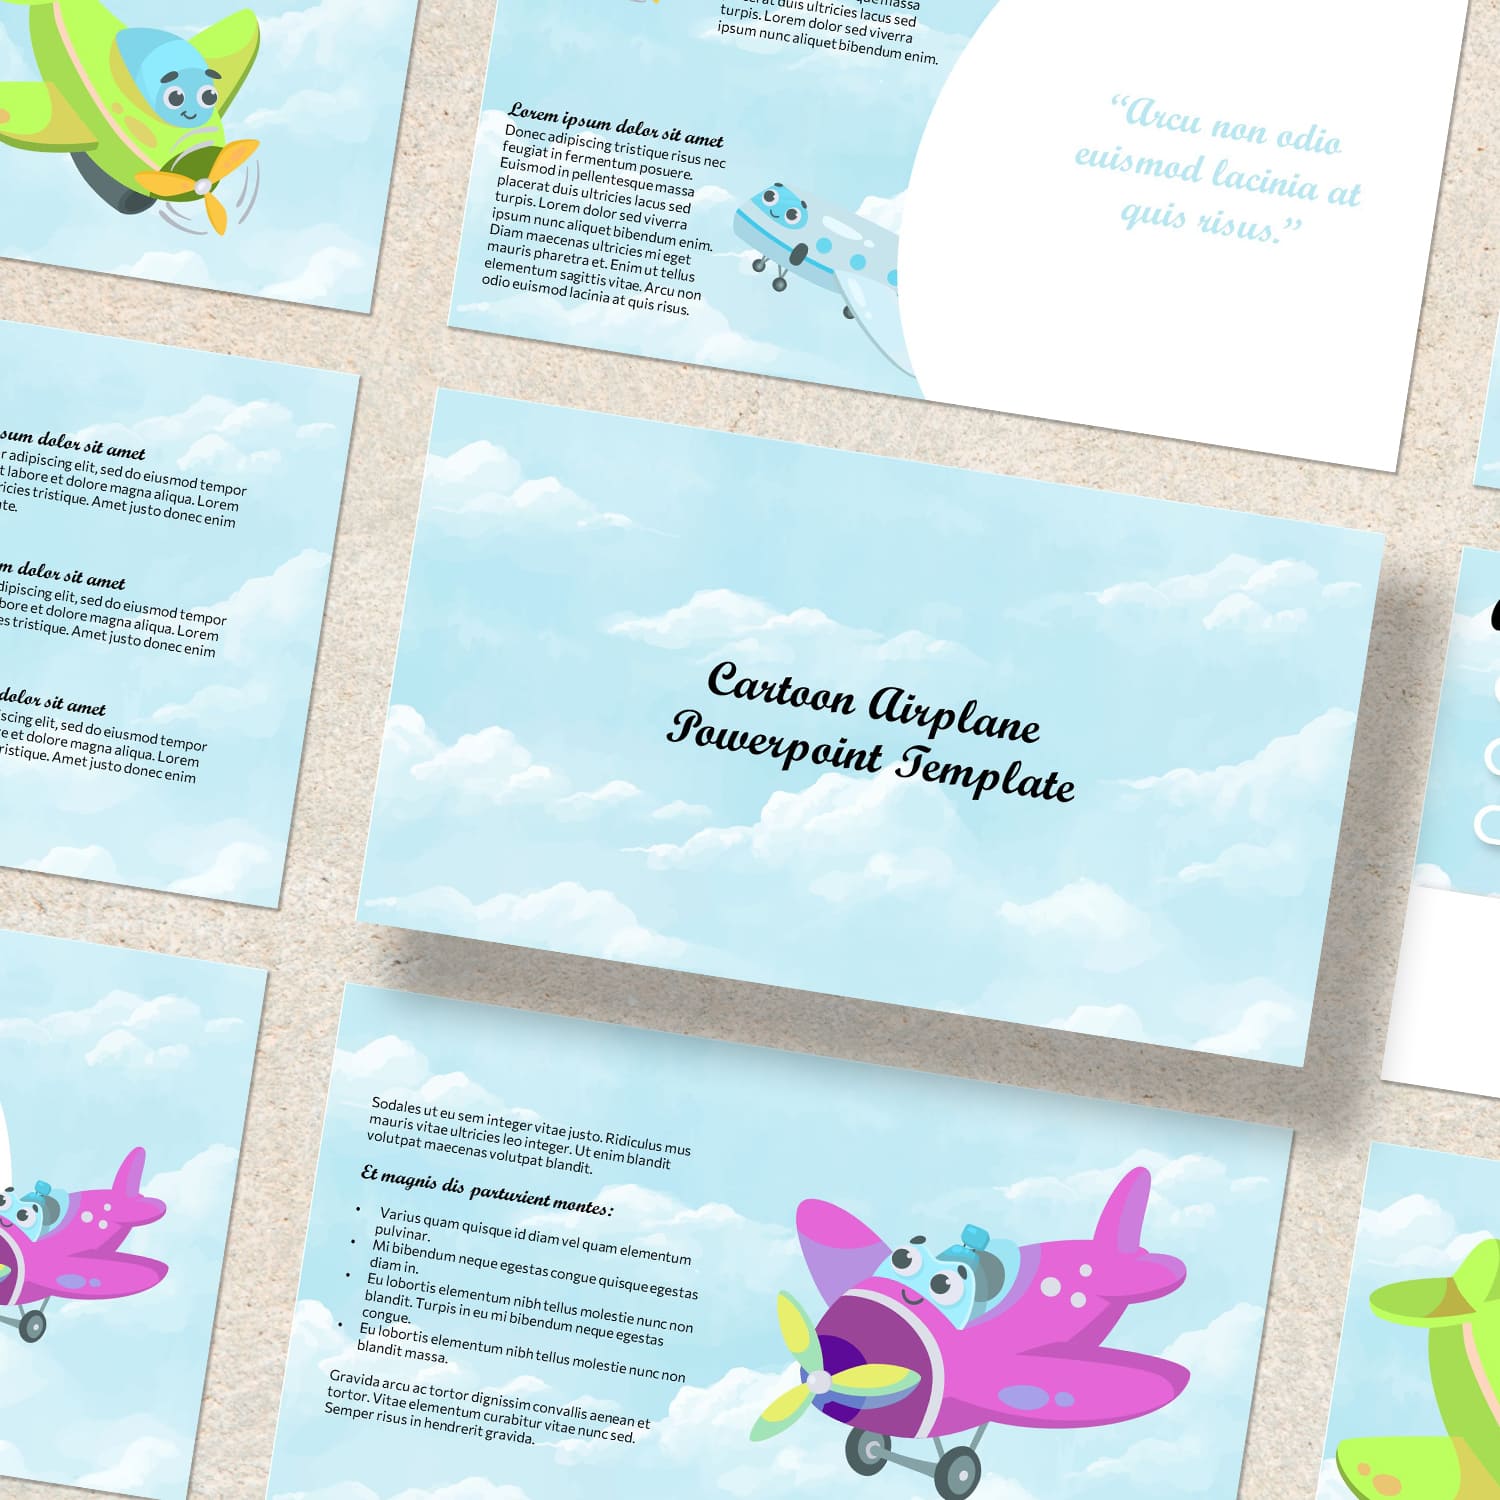 cartoon airplane powerpoint template cover.